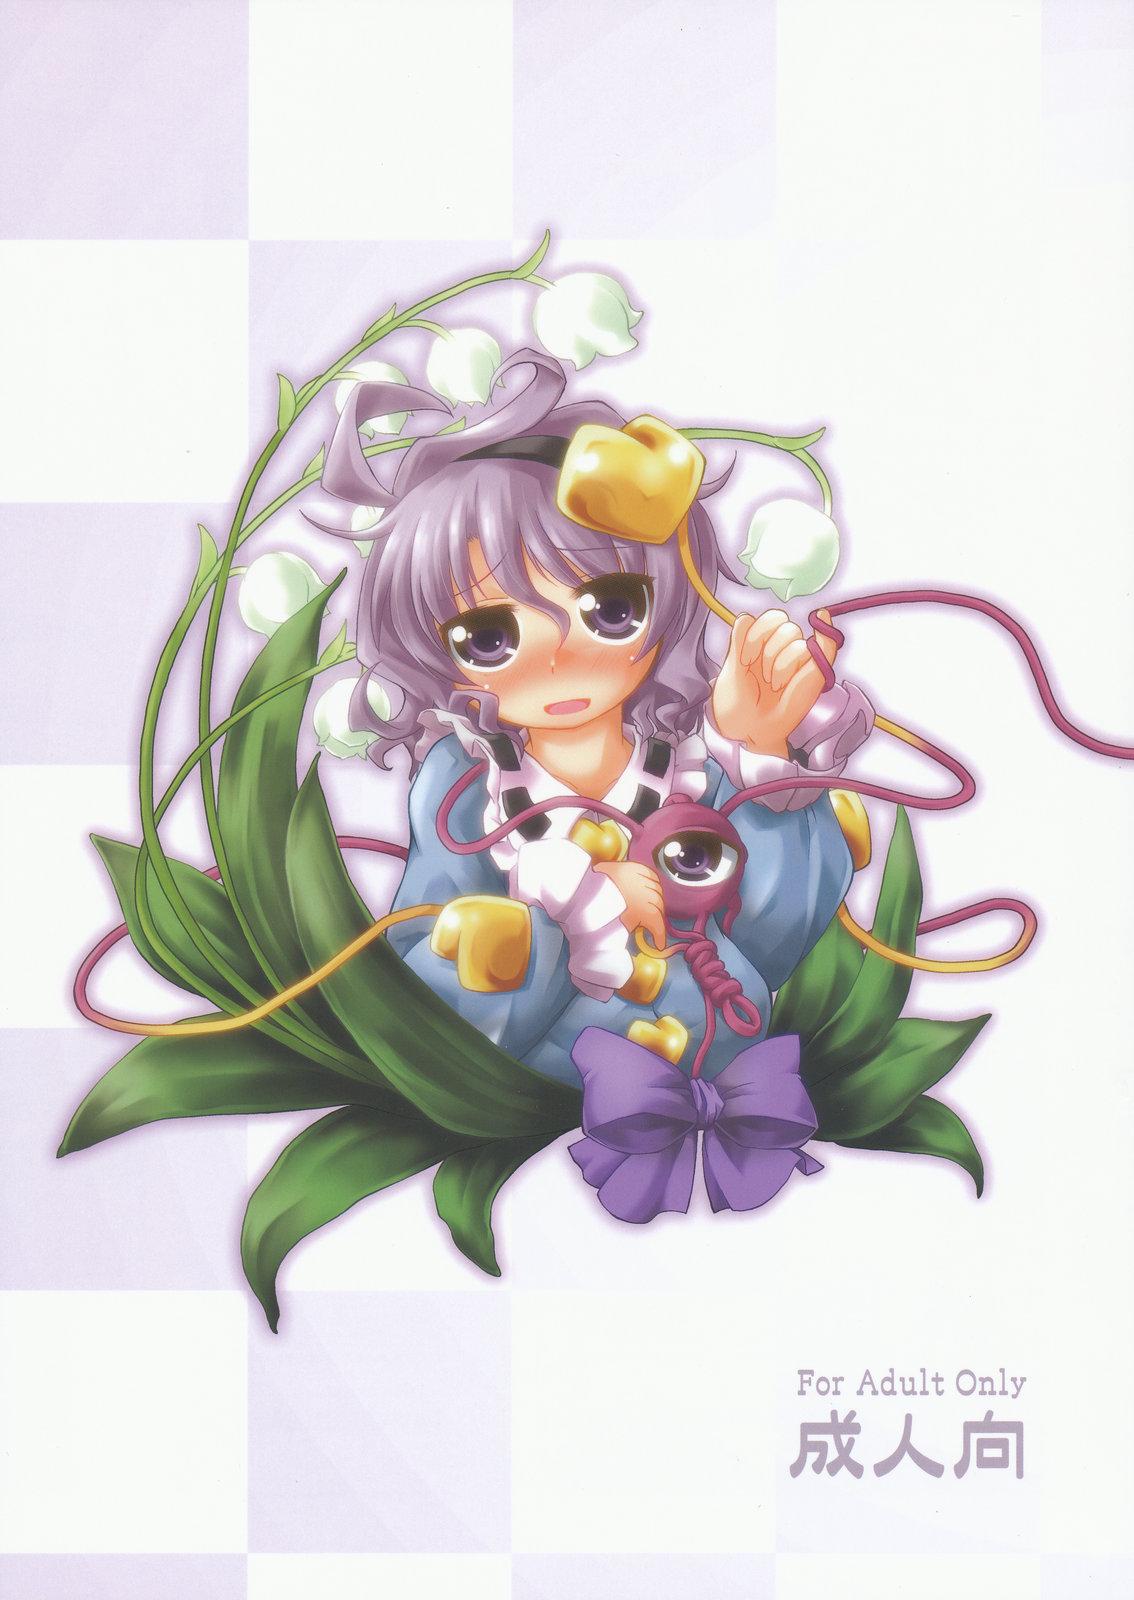 Ex Girlfriends Synchro Feeling - Touhou project Exhib - Picture 1